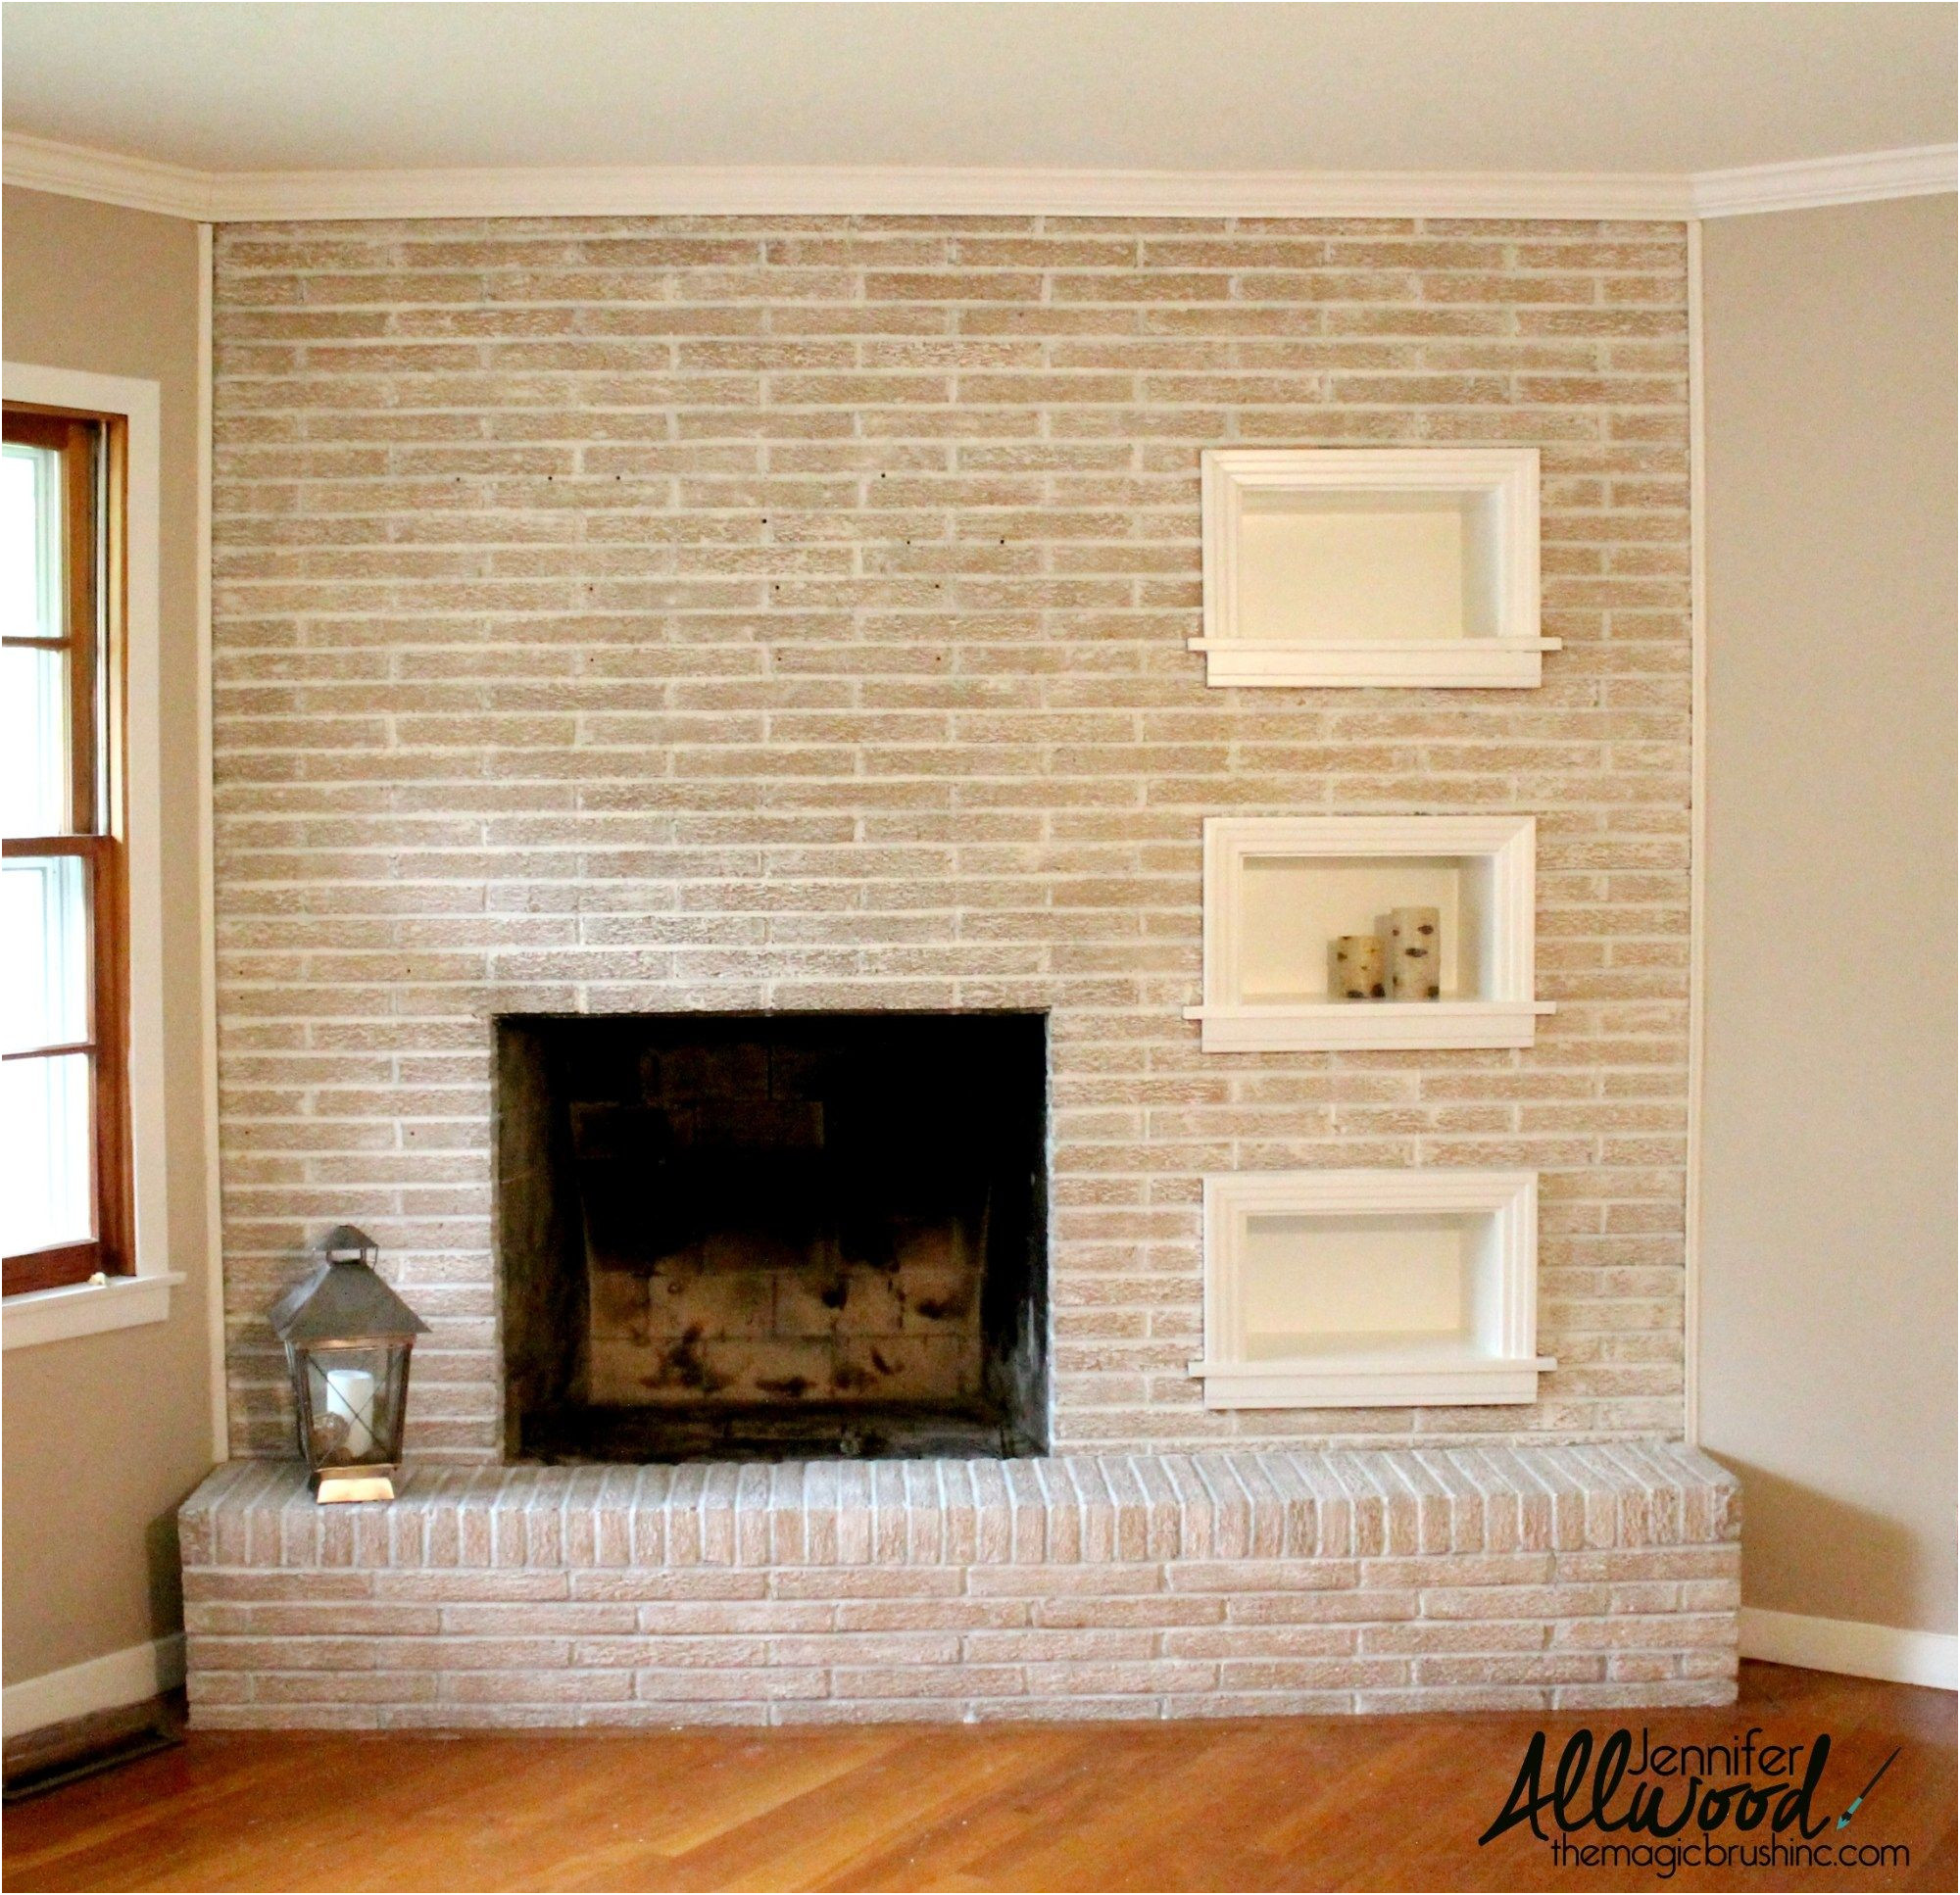 Fresh Paint Ideas for Fireplace